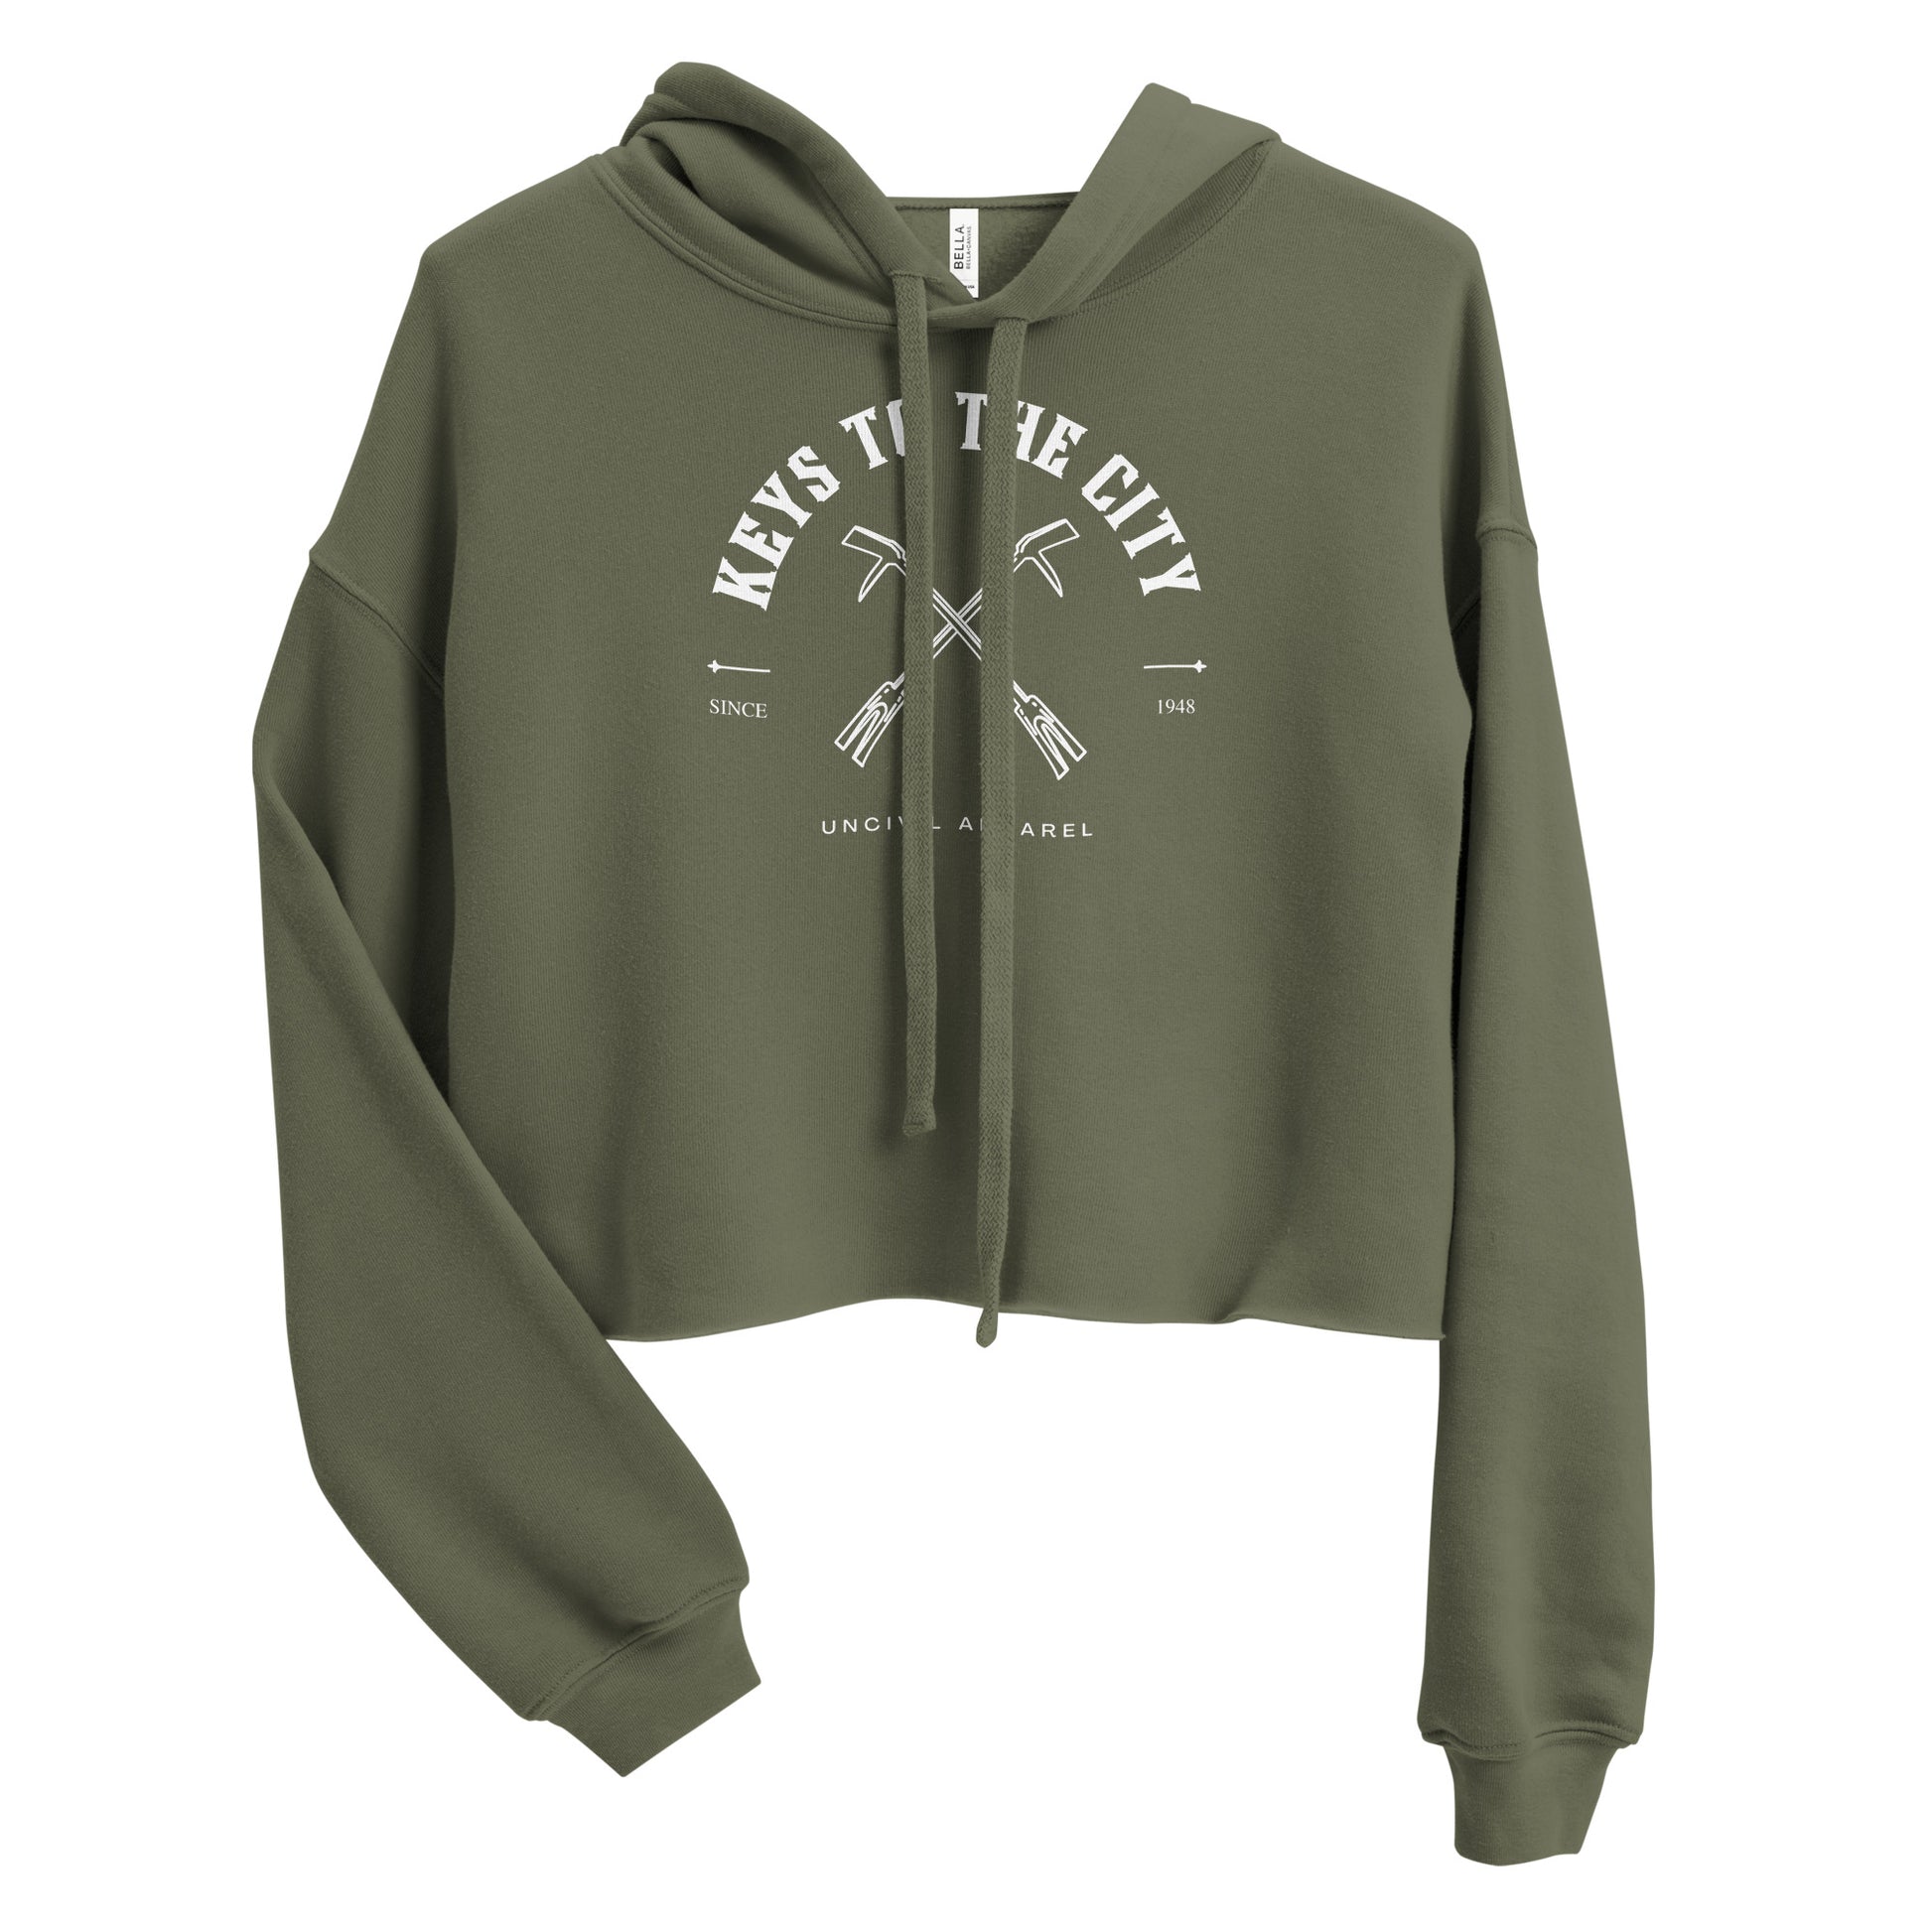 Keys to the City Halligan Firefighter Women's Crop Hoodie, Army Green sweater.